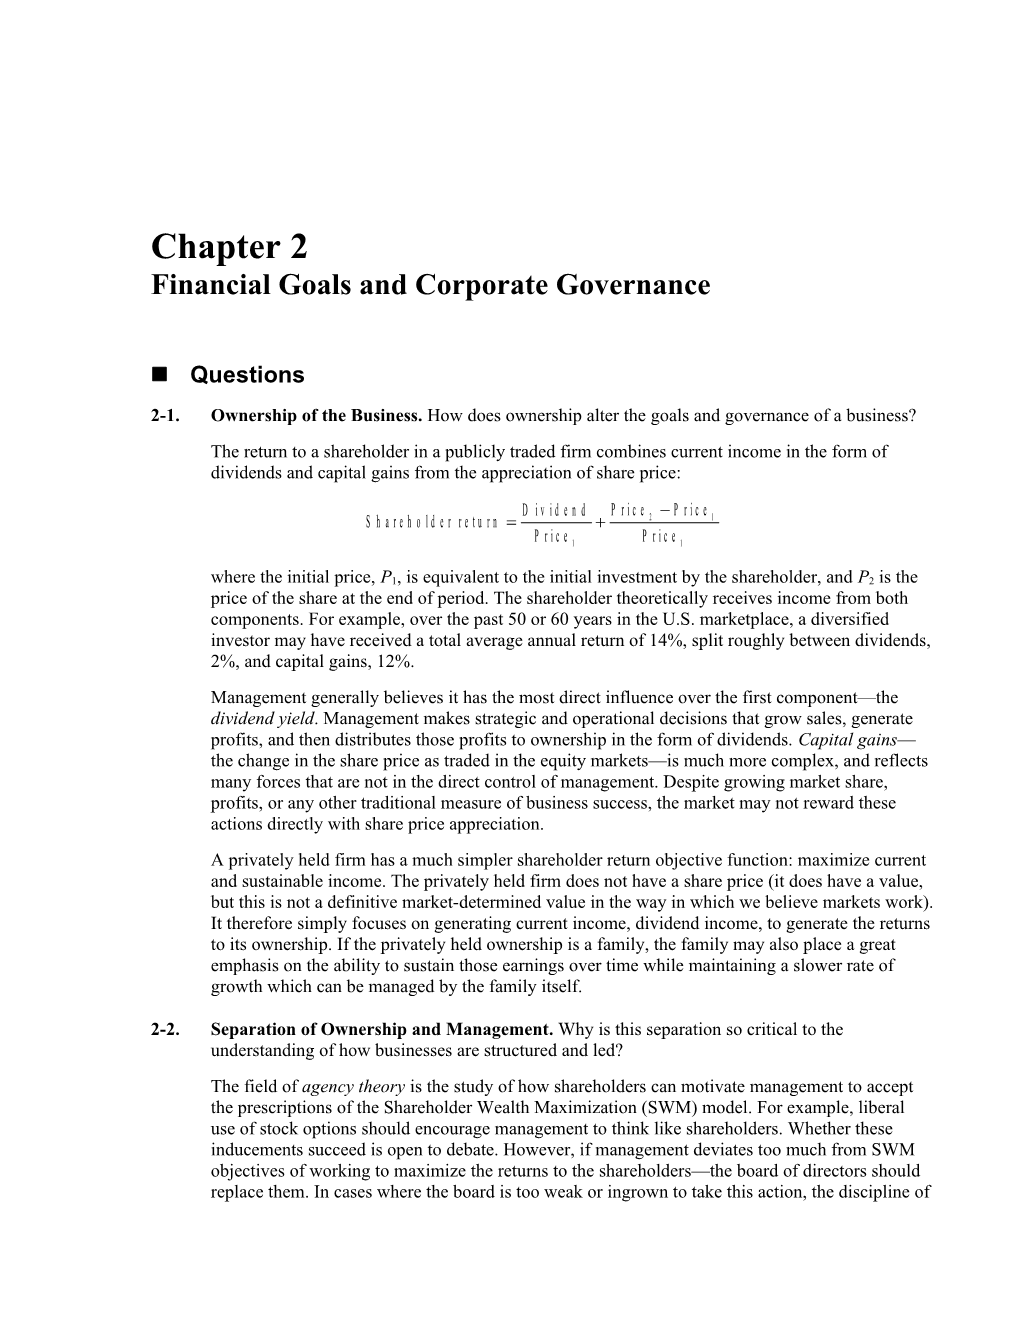 Chapter 2 Financial Goals and Corporate Governance